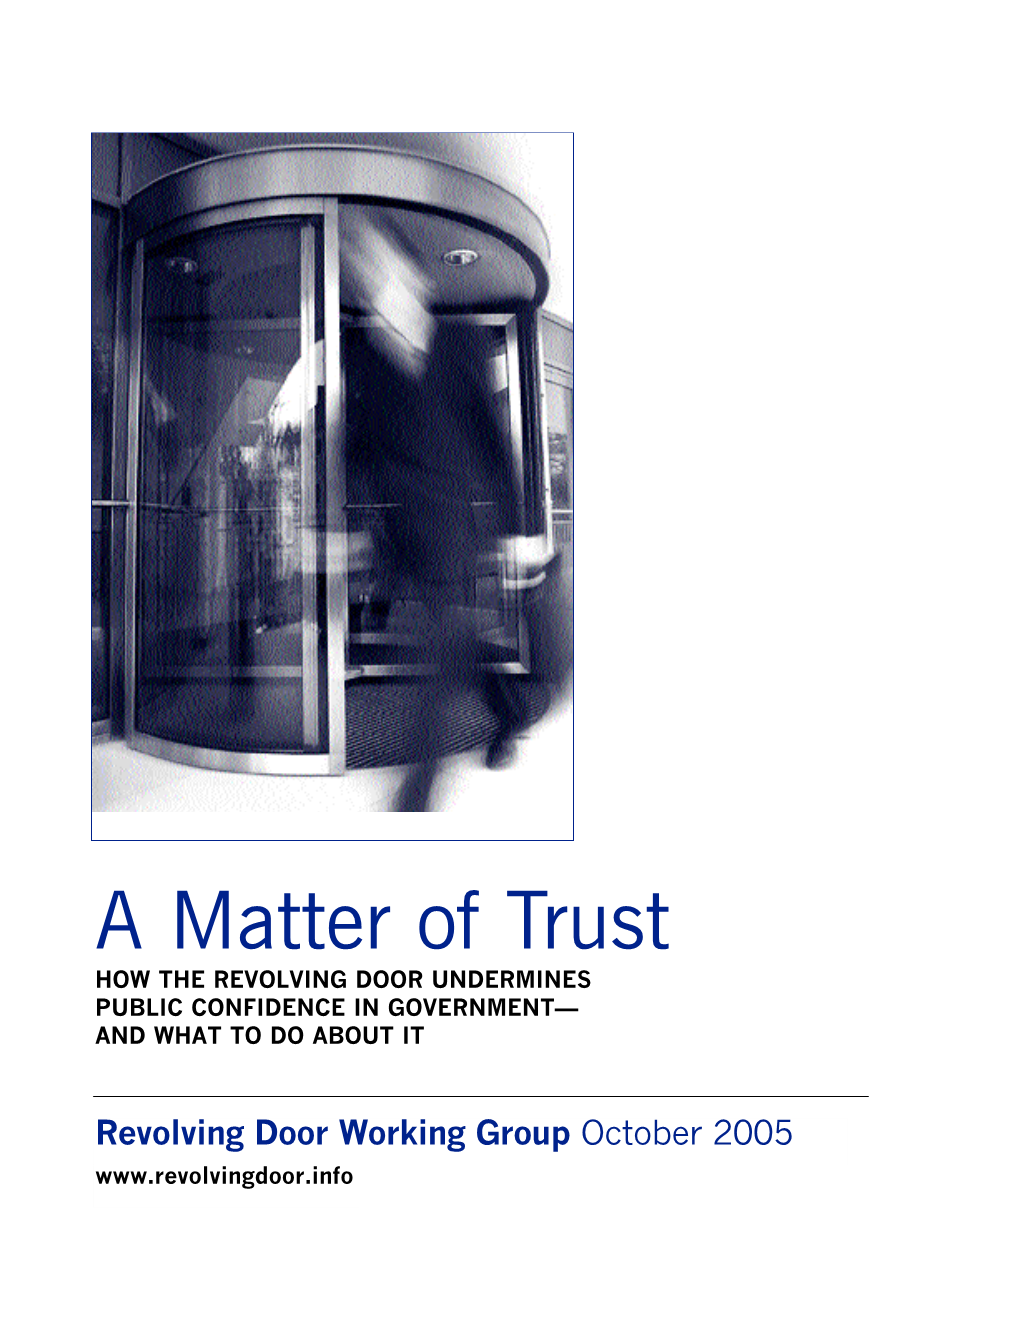 A Matter of Trust HOW the REVOLVING DOOR UNDERMINES PUBLIC CONFIDENCE in GOVERNMENT— and WHAT to DO ABOUT IT